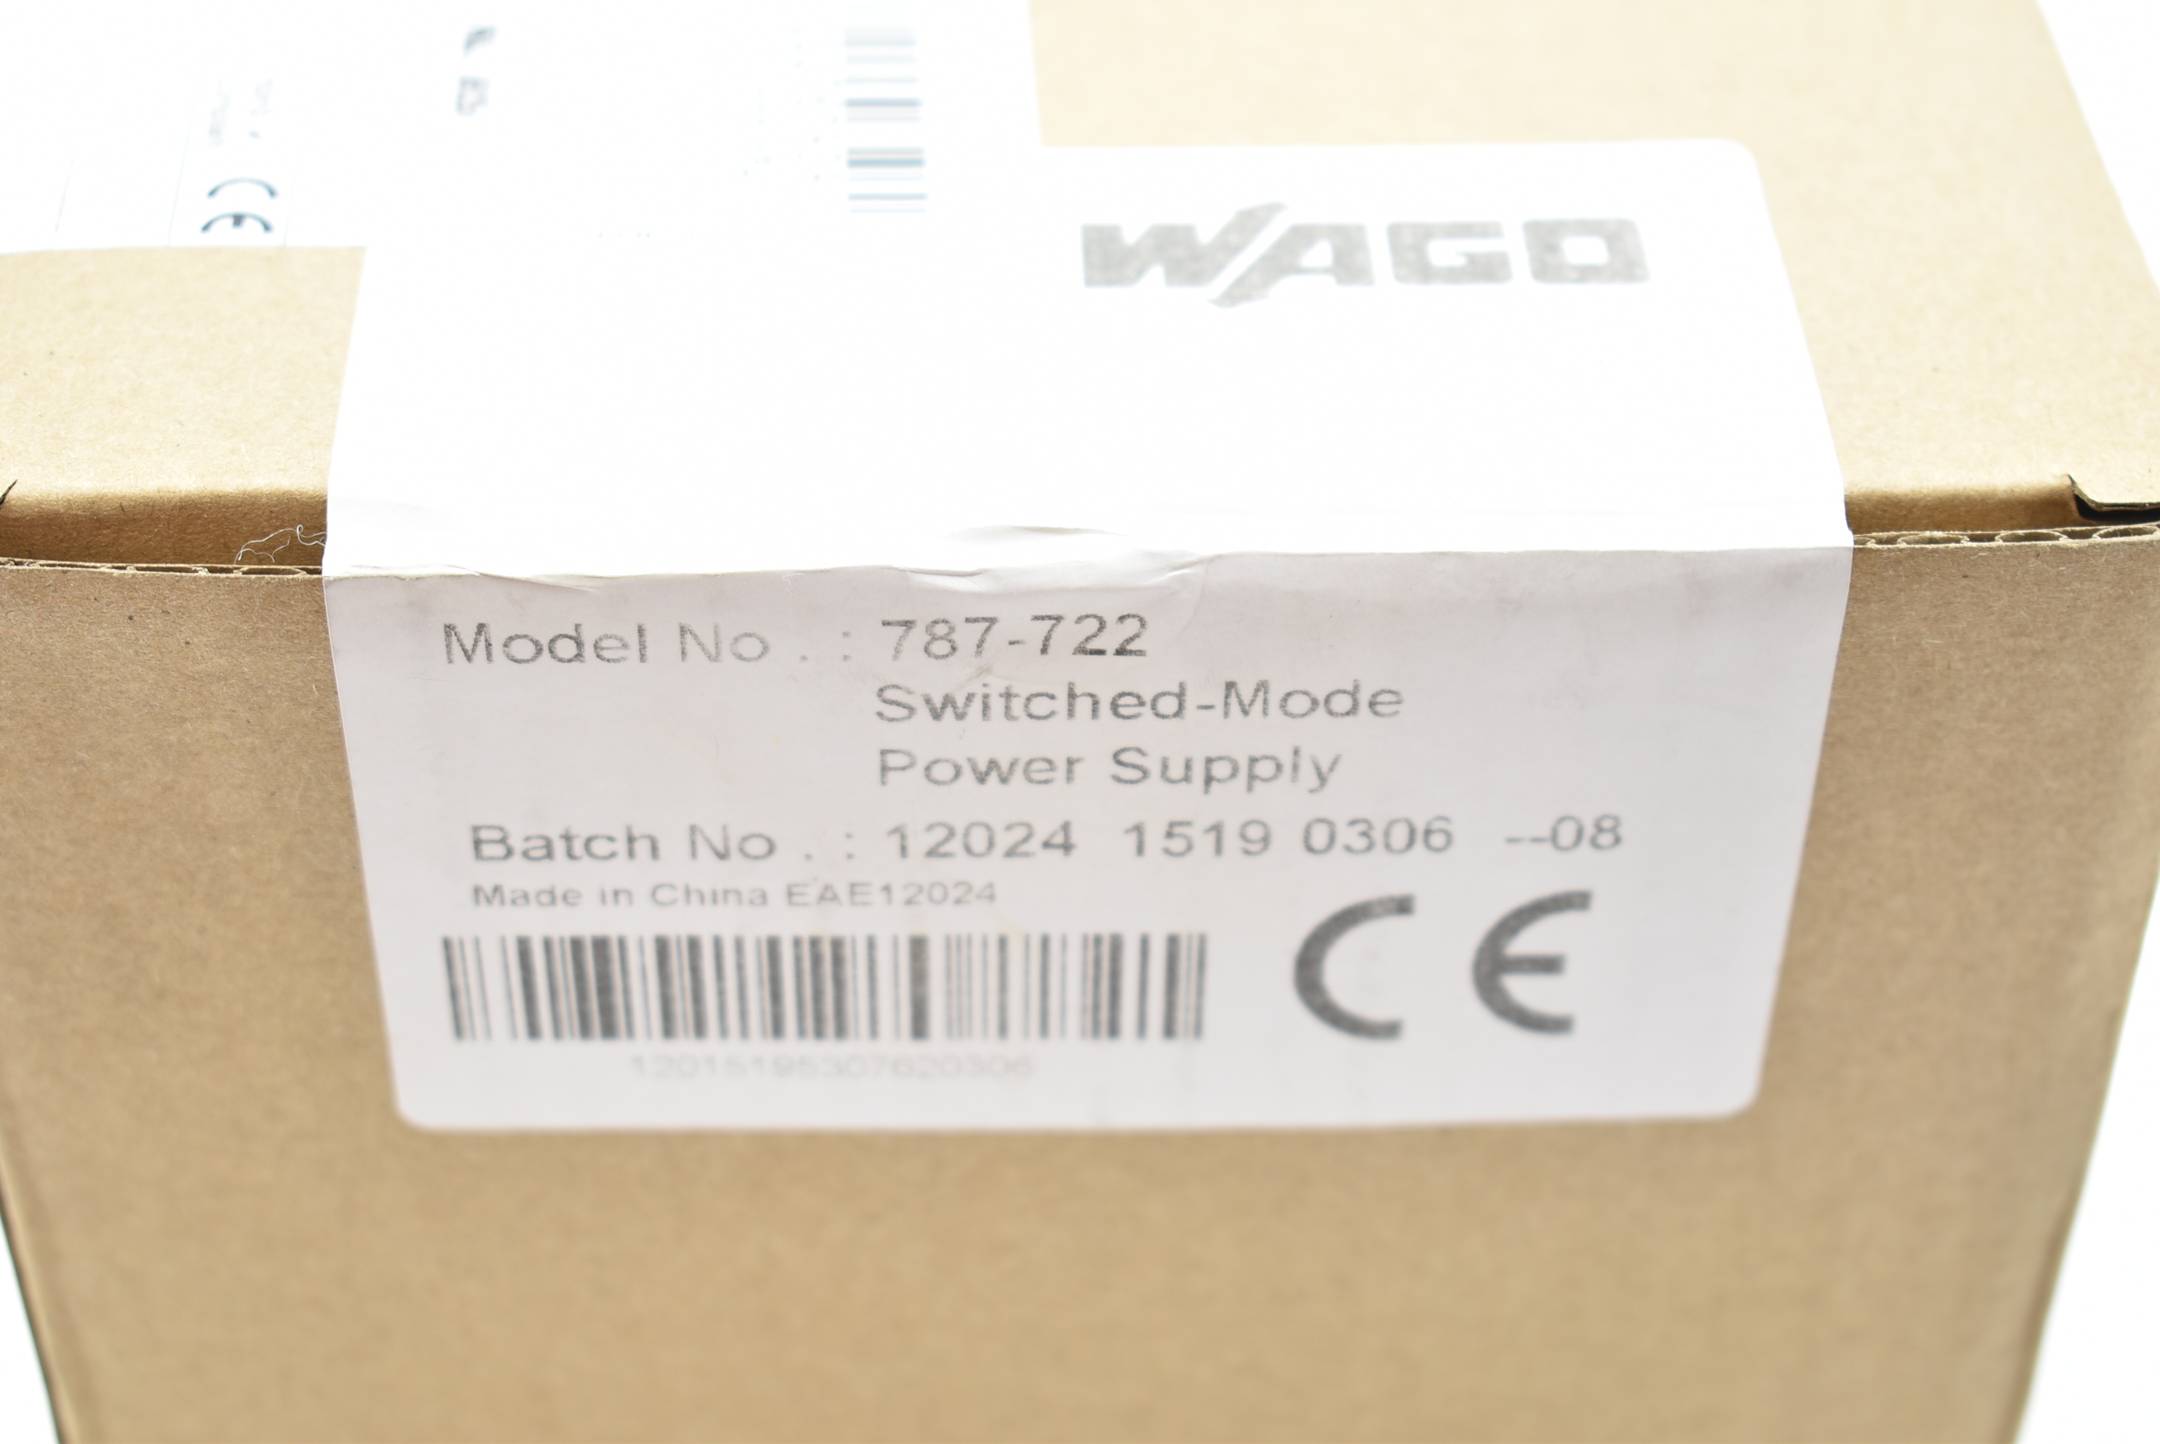 Wago Switched-Mode Power Supply 787-722 ( 12024 1519 0306 )